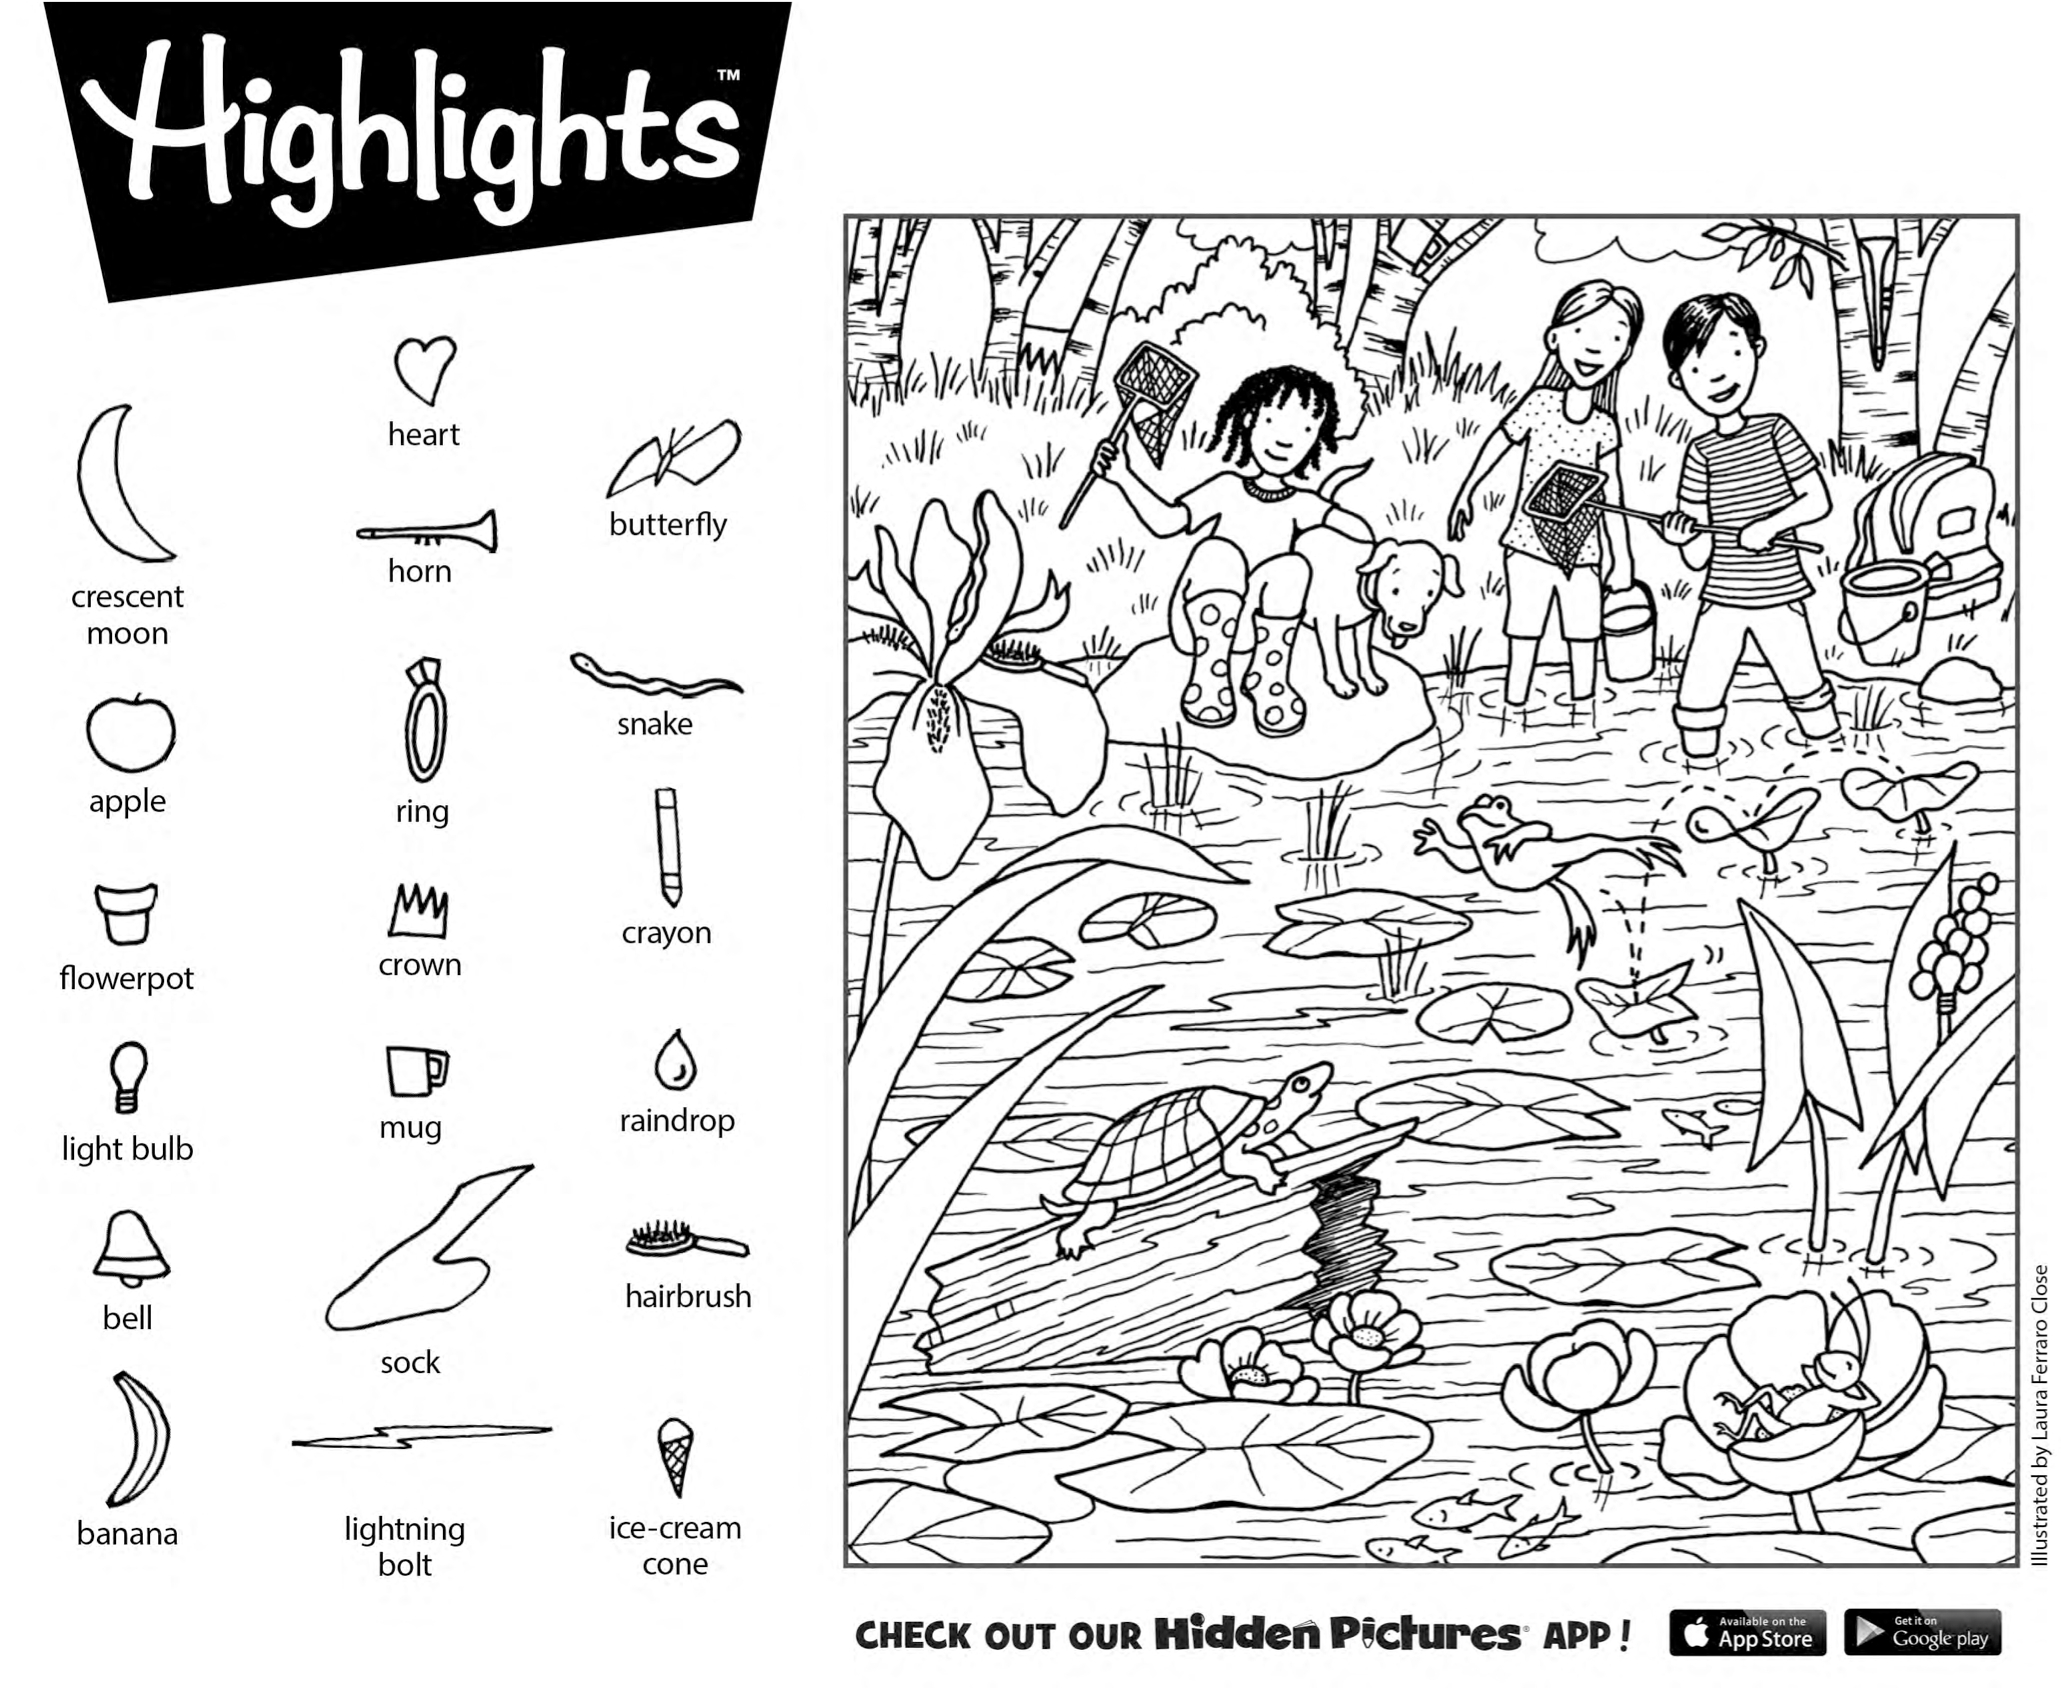 Download This Free Printable Hidden Pictures Puzzle From Highlights - Free Printable Hidden Pictures For Kids